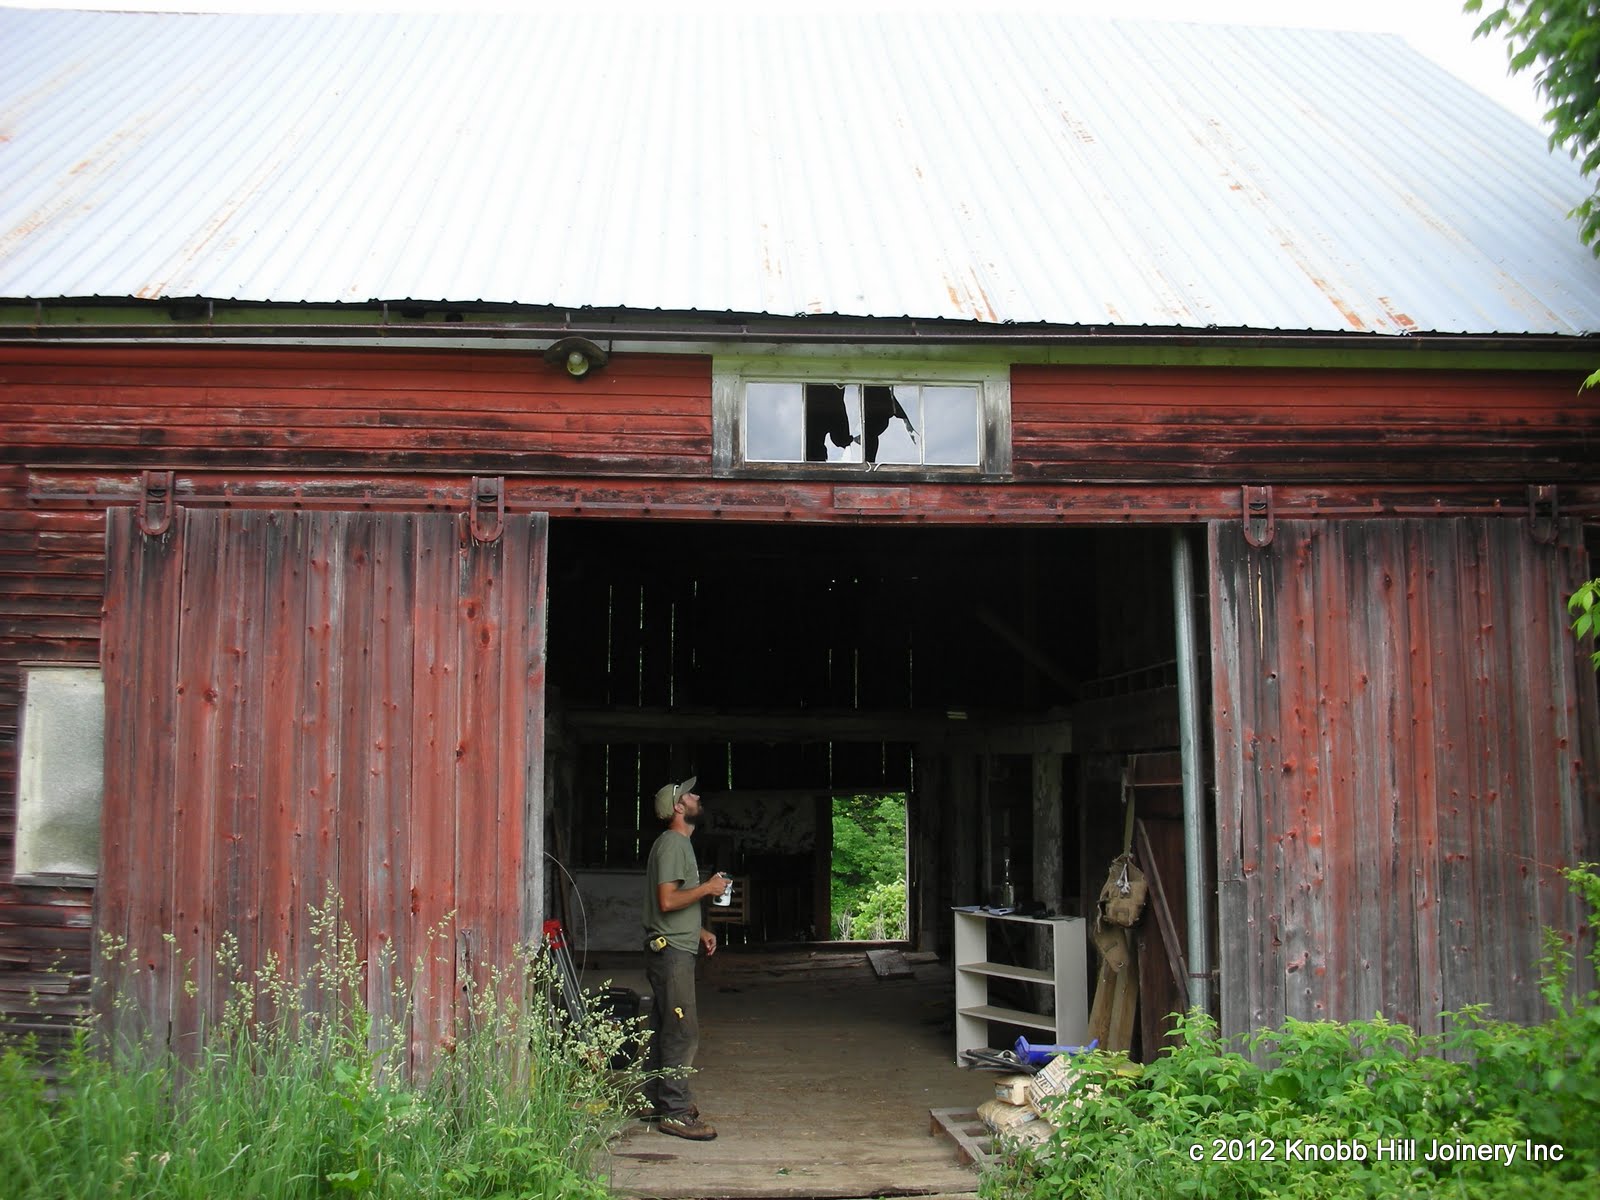 Two sides of the barn facing the road had been clapboarded in the late 1800's.